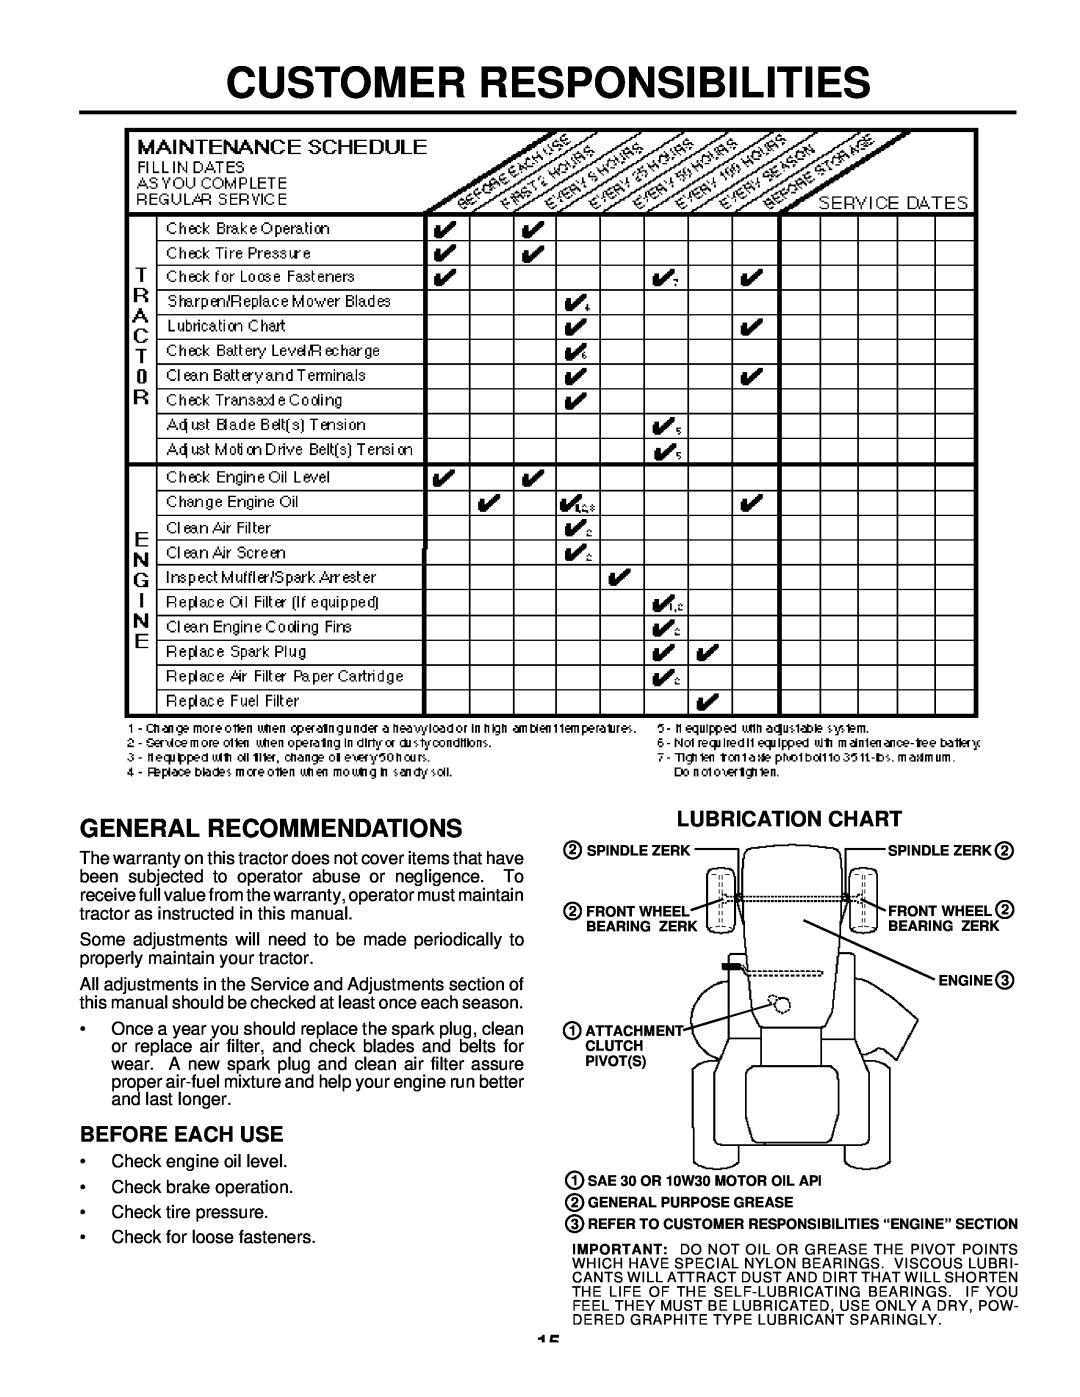 Husqvarna LTH125 owner manual Customer Responsibilities, General Recommendations, Lubrication Chart, Before Each Use 